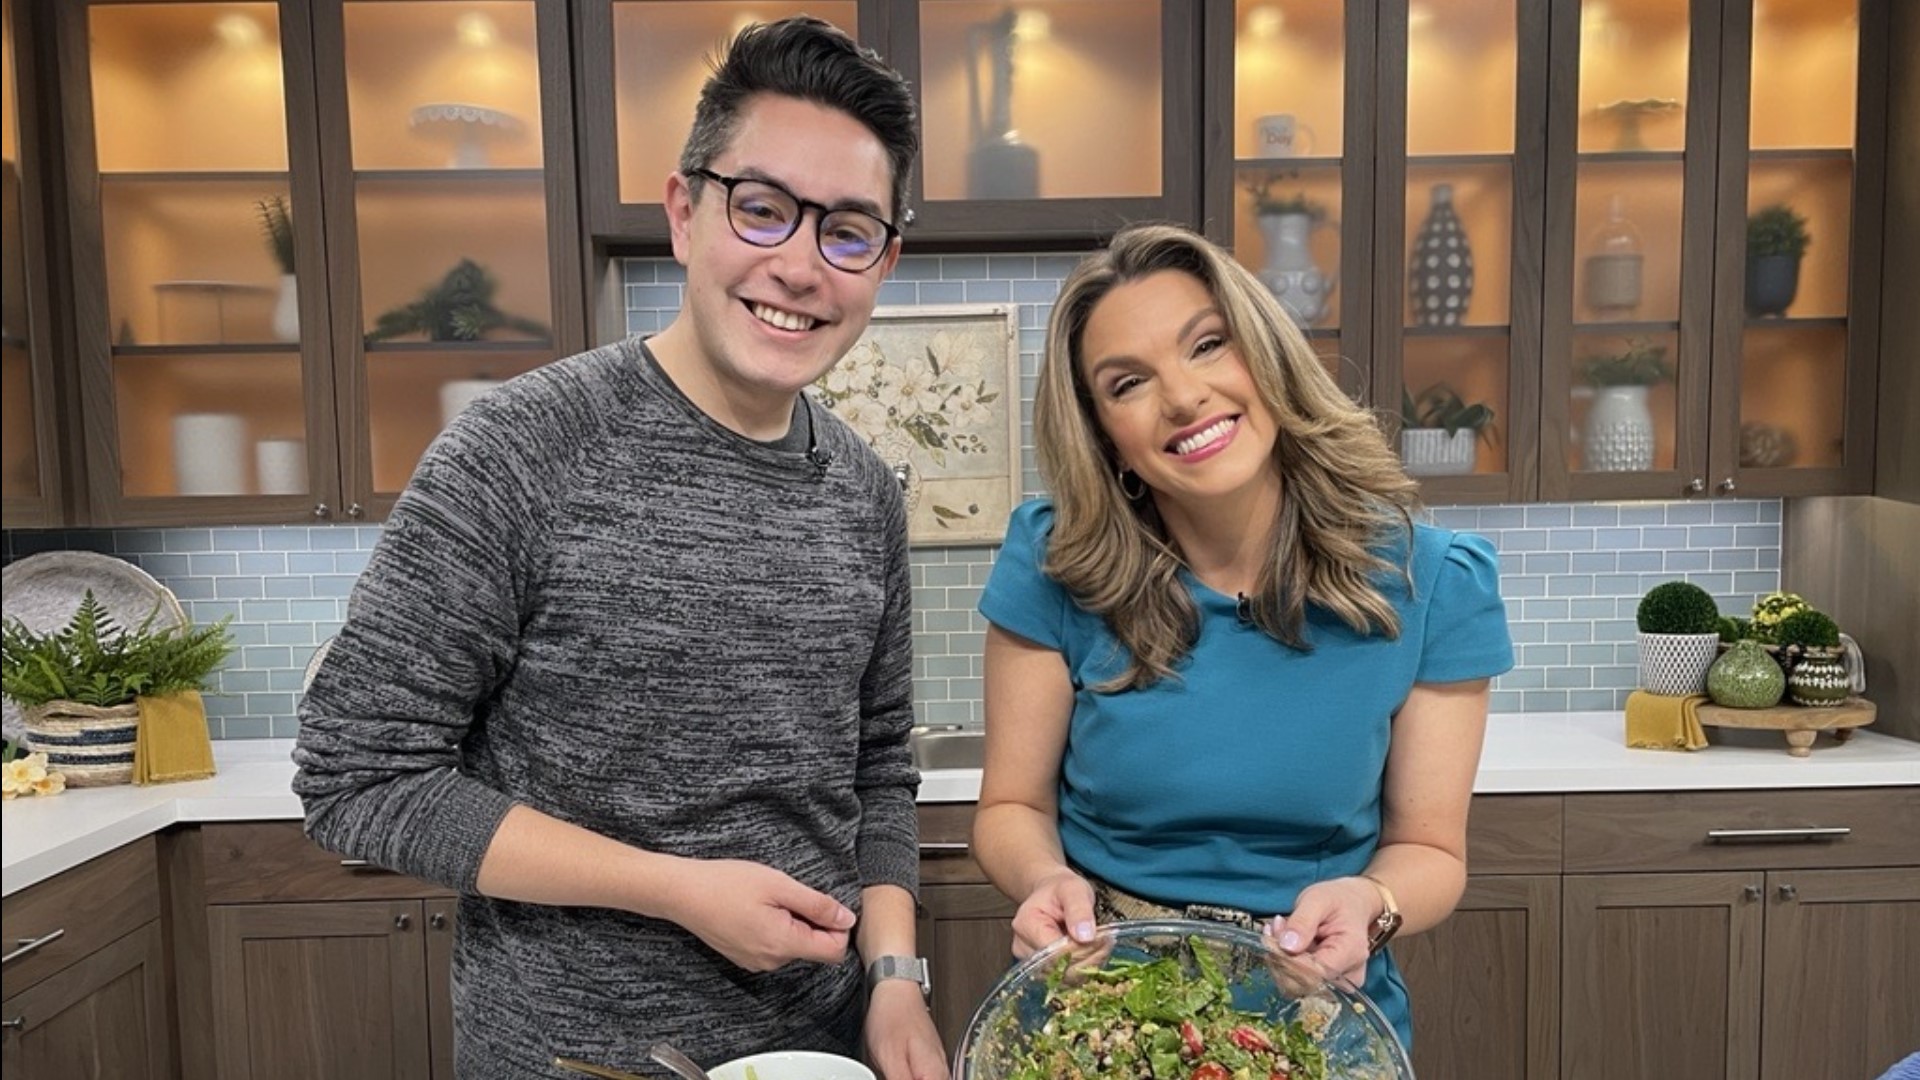 Executive producer Joseph Suttner showed Amity how to make a recipe from "The Workweek Lunch Cookbook" by Talia Koren. #newdaynw